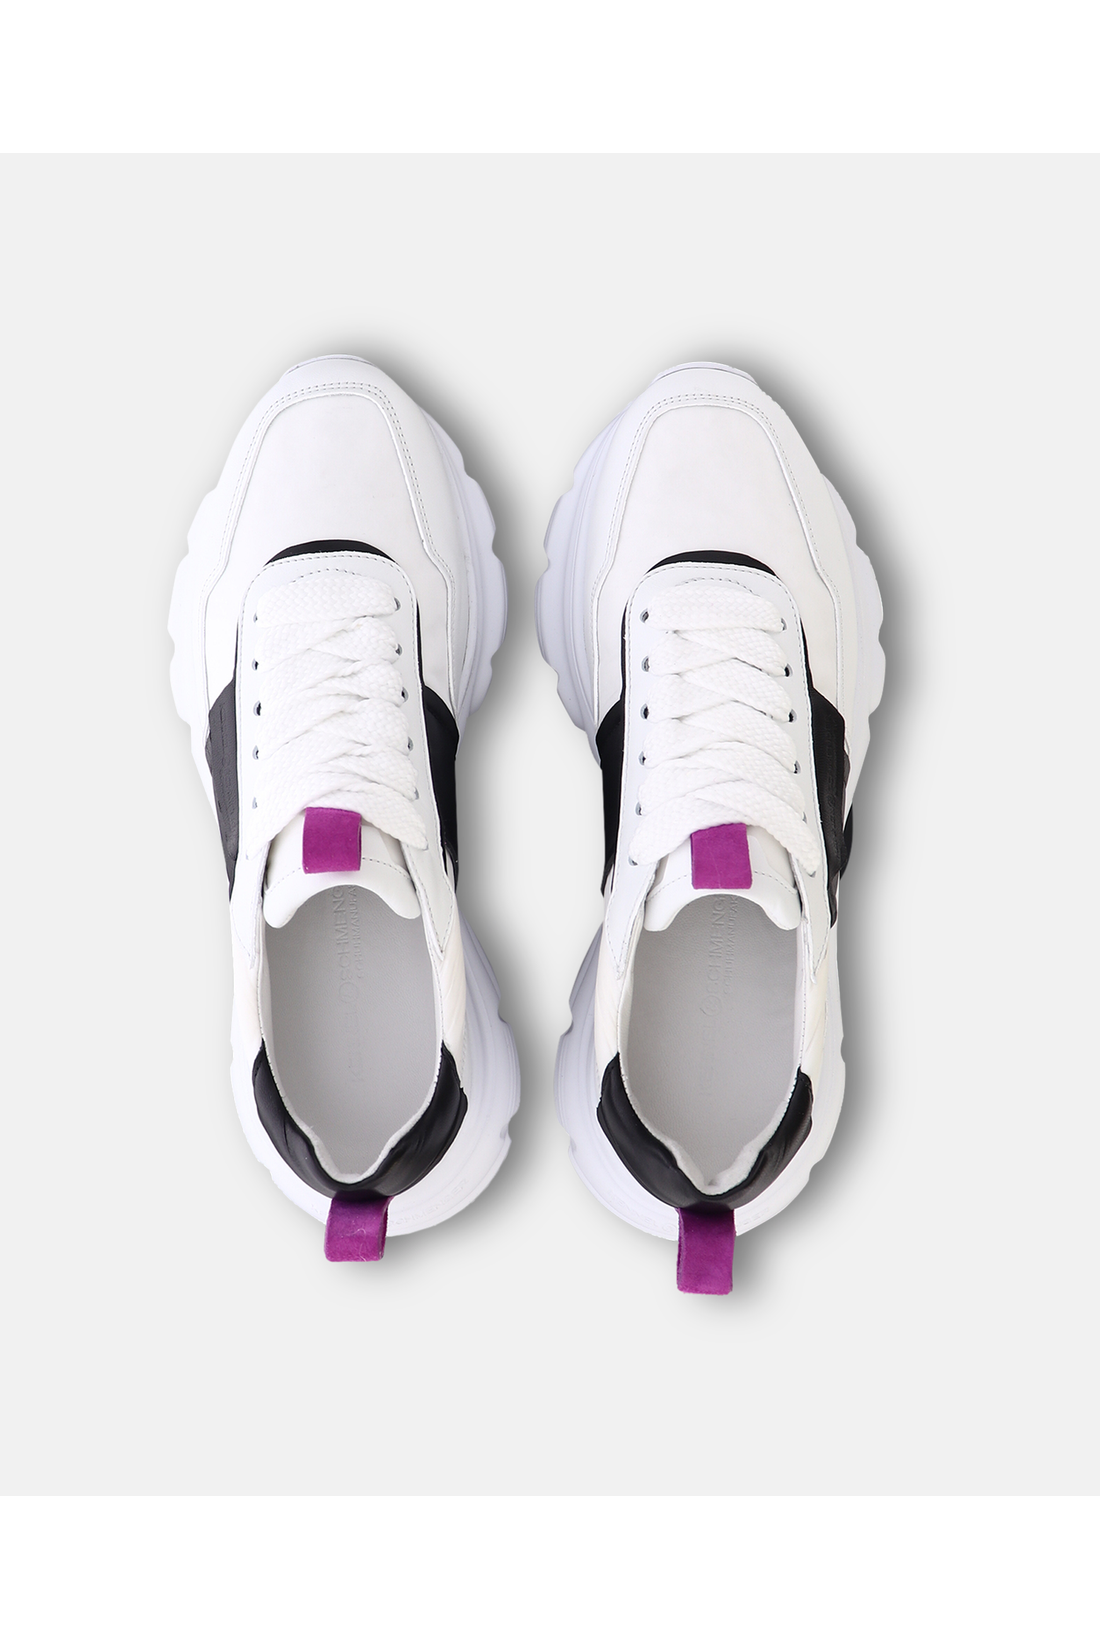 Kennel-Schmenger-OUTLET-SALE-FEVER-Sneakers-ARCHIVE-COLLECTION-4.png